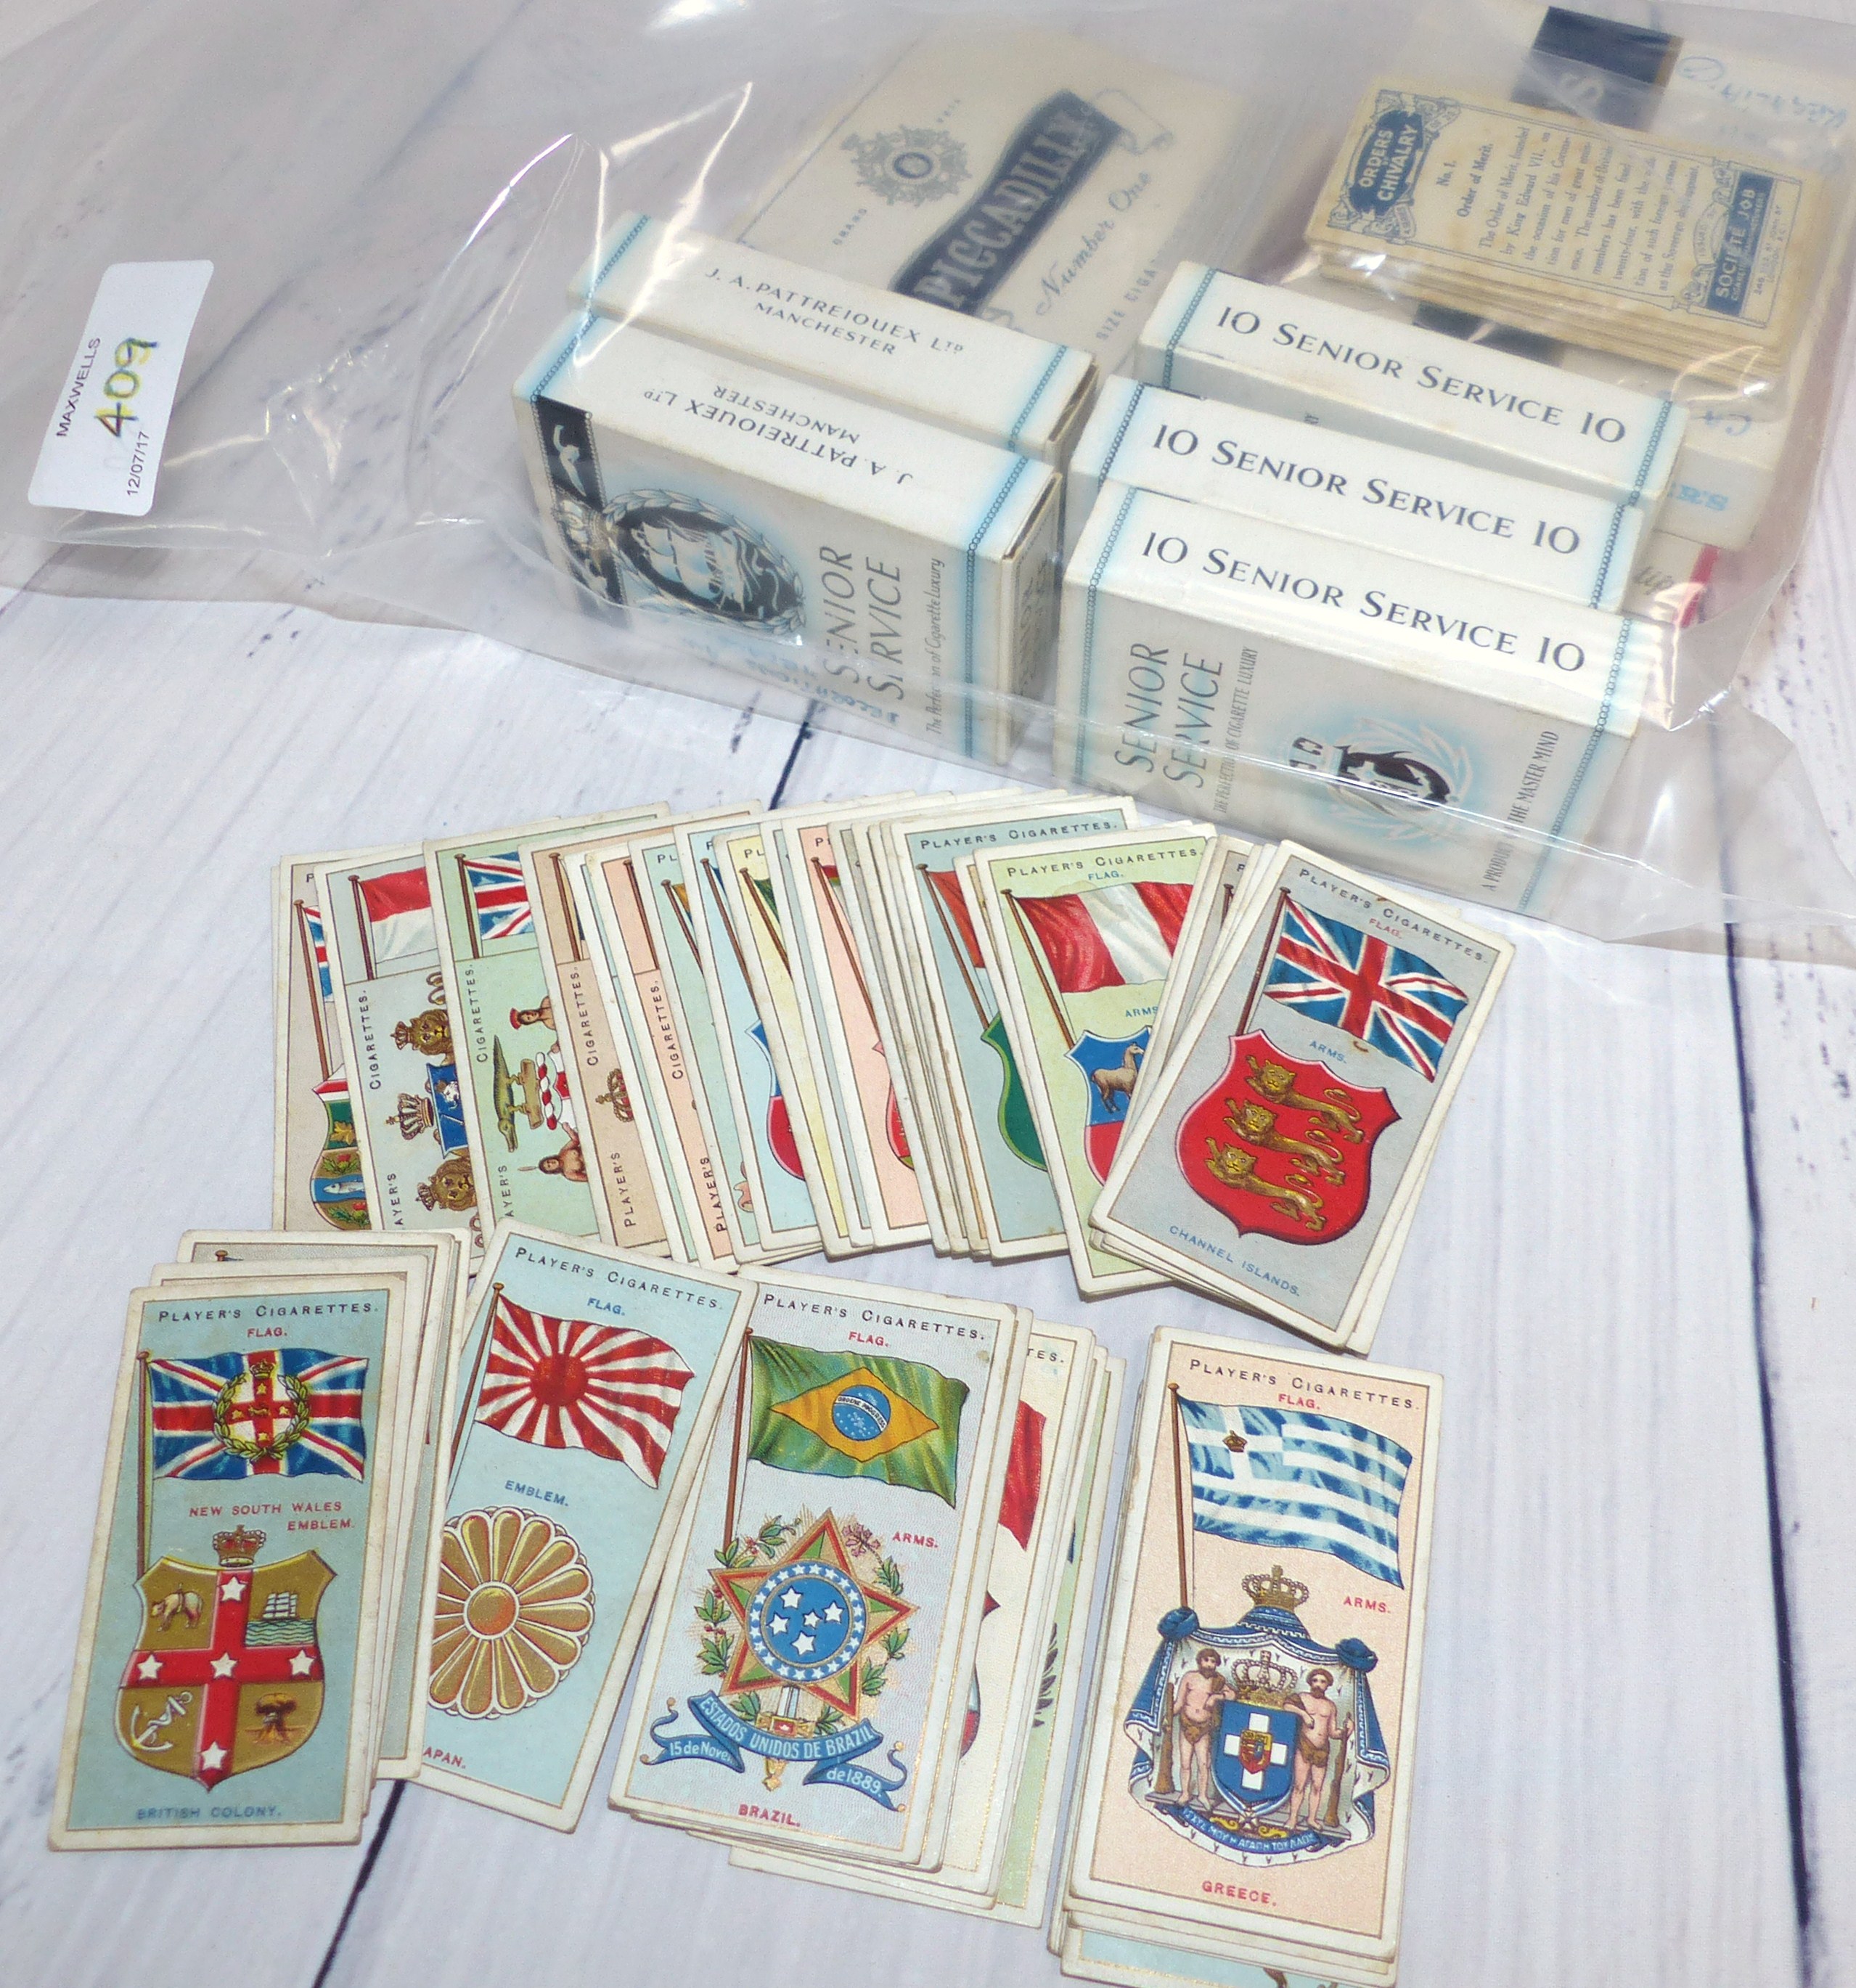 Cigarette Cards: Player's Country Arms and Flags (50) (2 sets), Societe Job Orders of Chivalry (25),